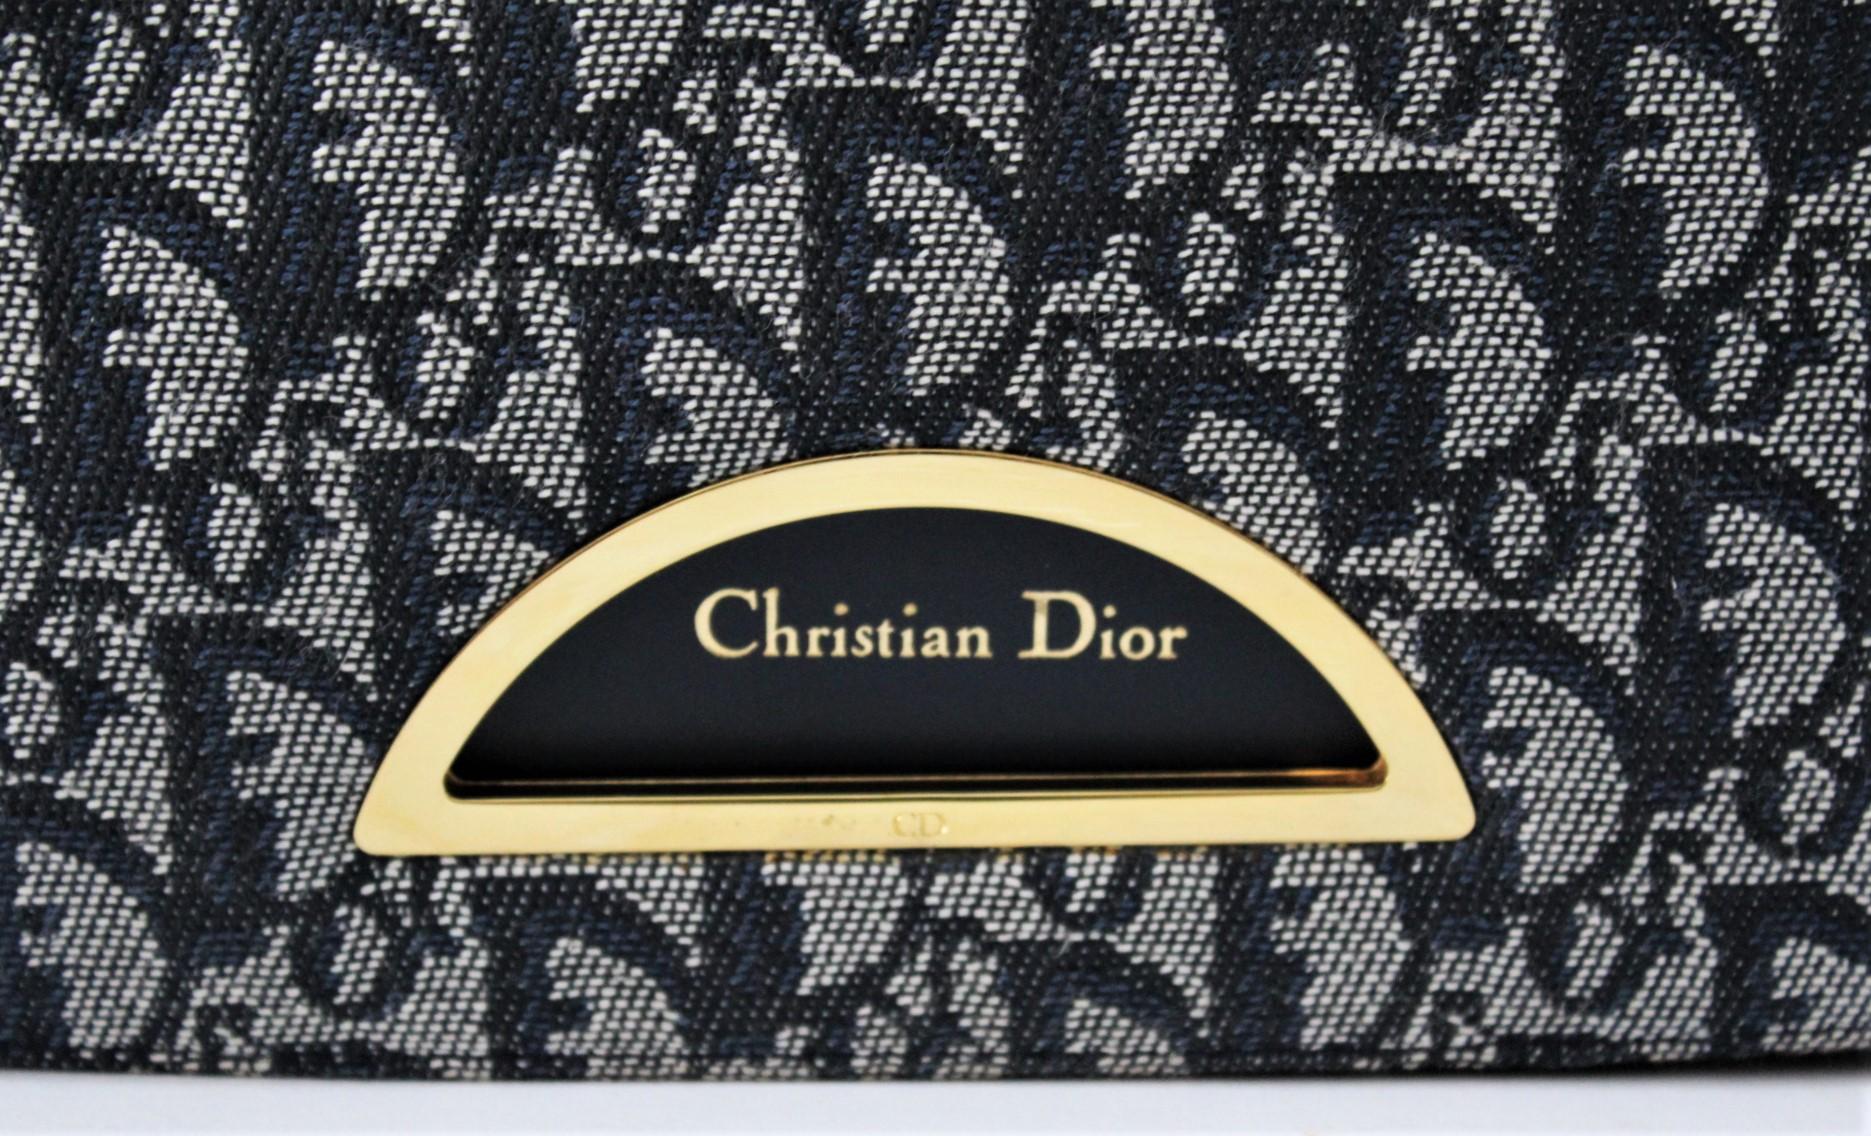 
Dior bag with a vintage style but currently very trendy. The branded fantasy revived this year is proving very popular among bloggers and with them all the fans. Made in canvas with leather handle. Magnetic flap. Gold hardware. Excellent conditions.